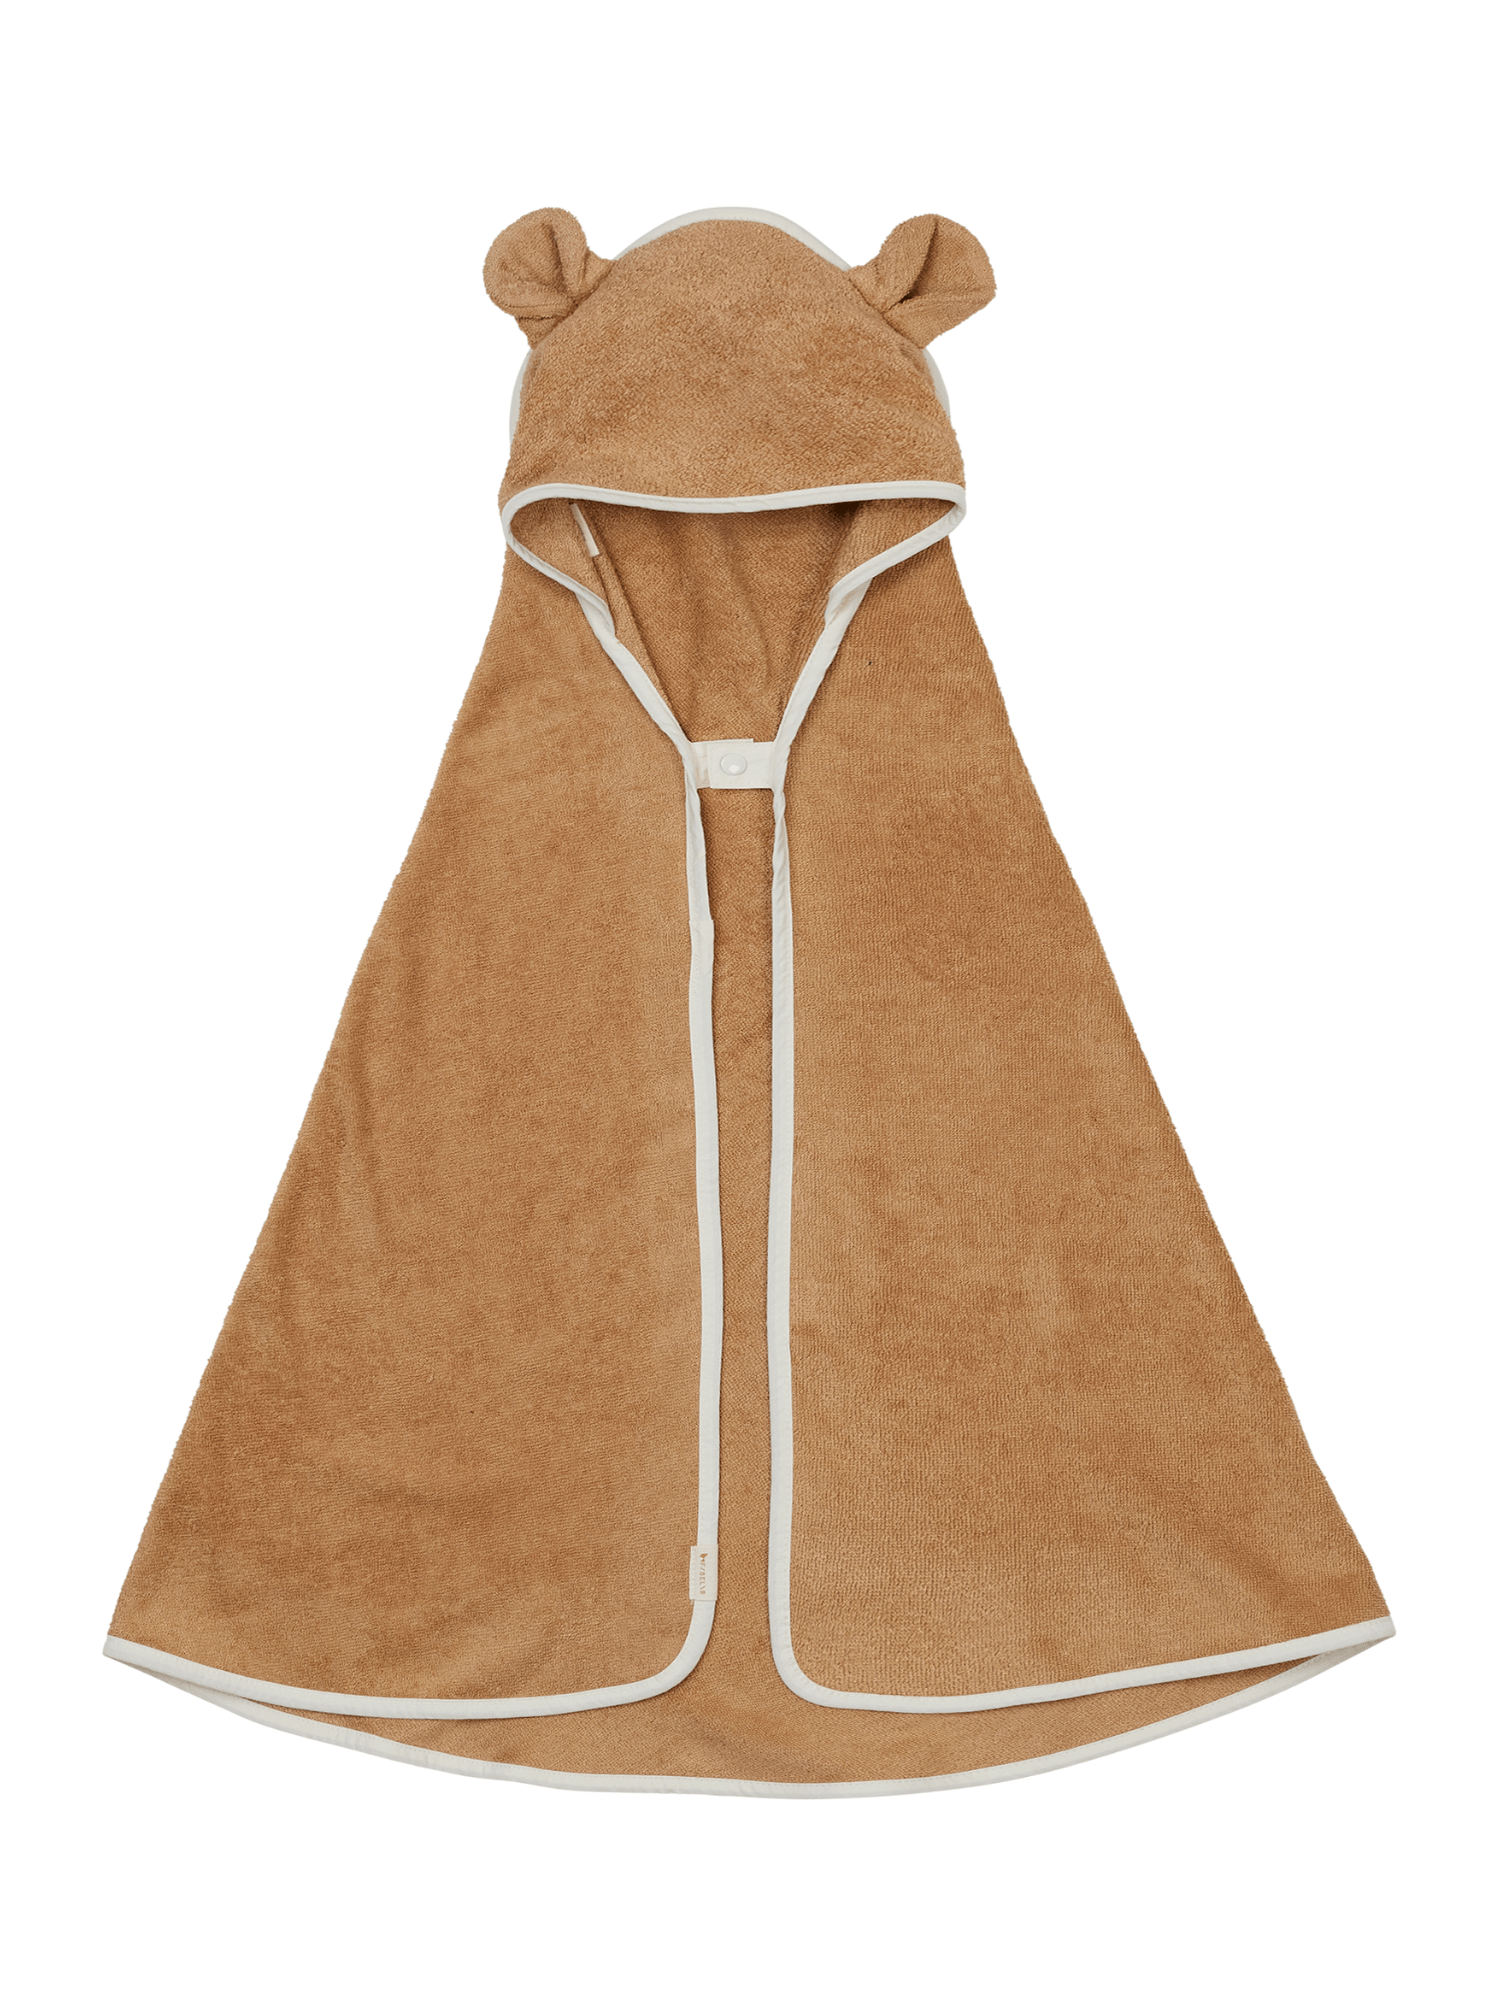 Bear Bamboo Hooded Towel For Kids By Fabelab